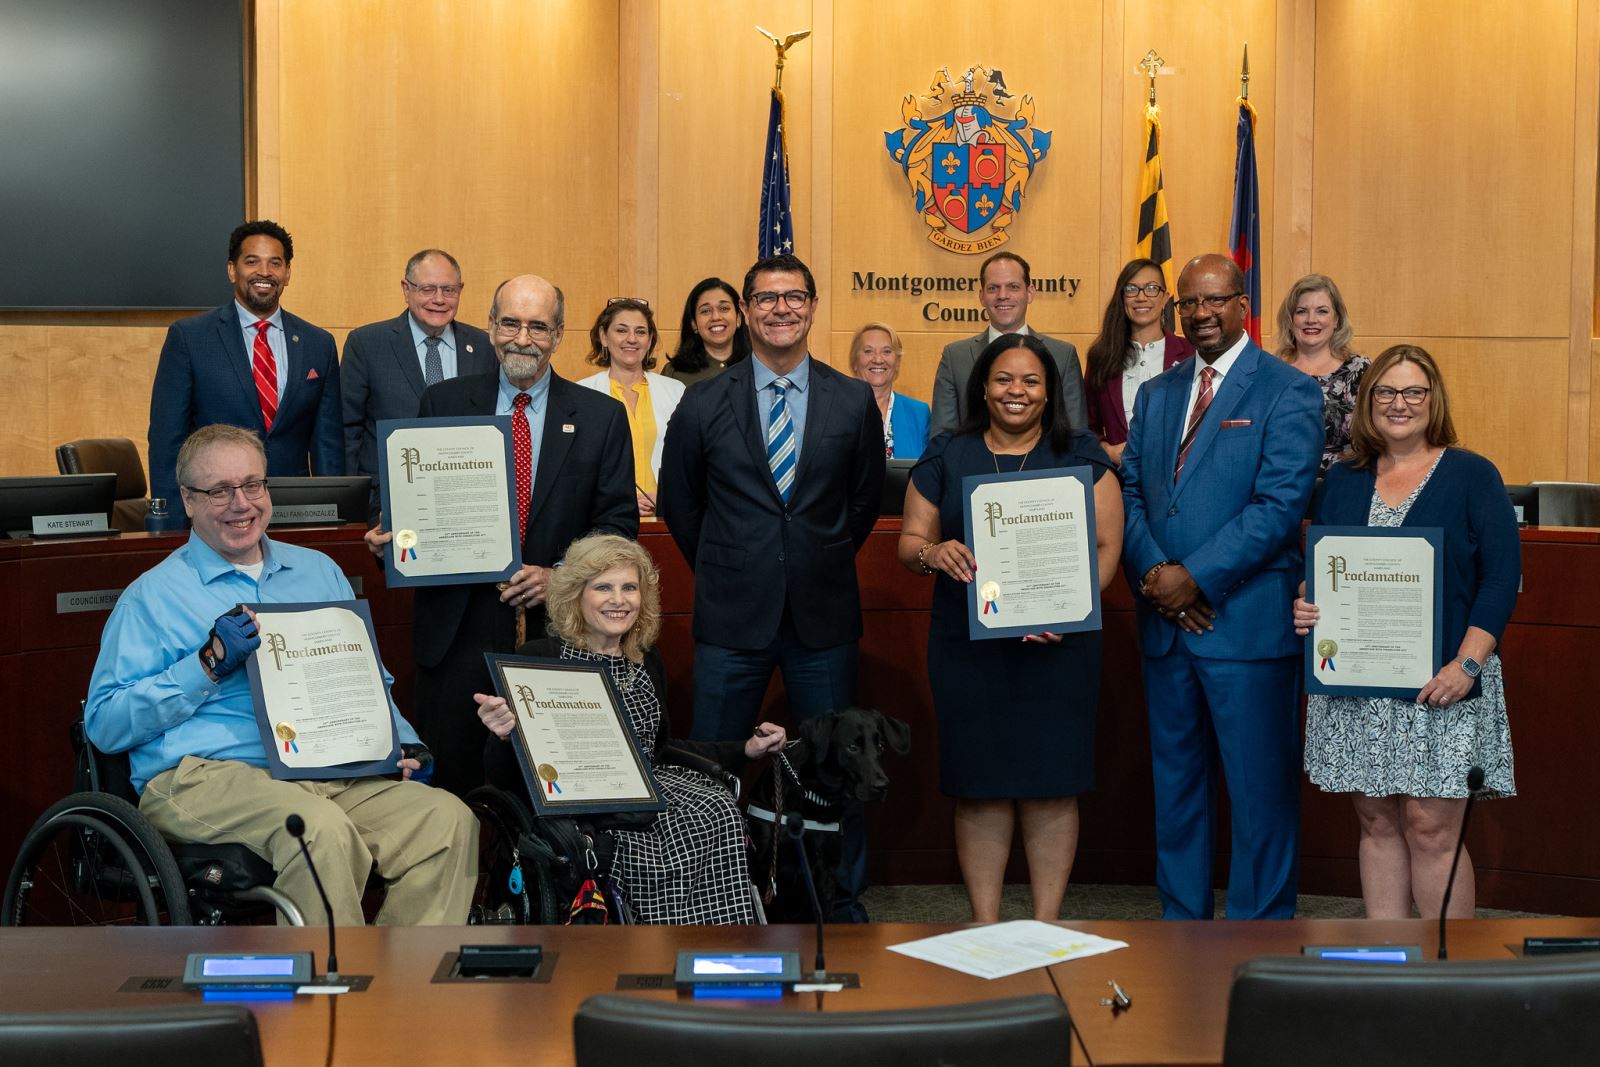 County Council ADA Proclamation